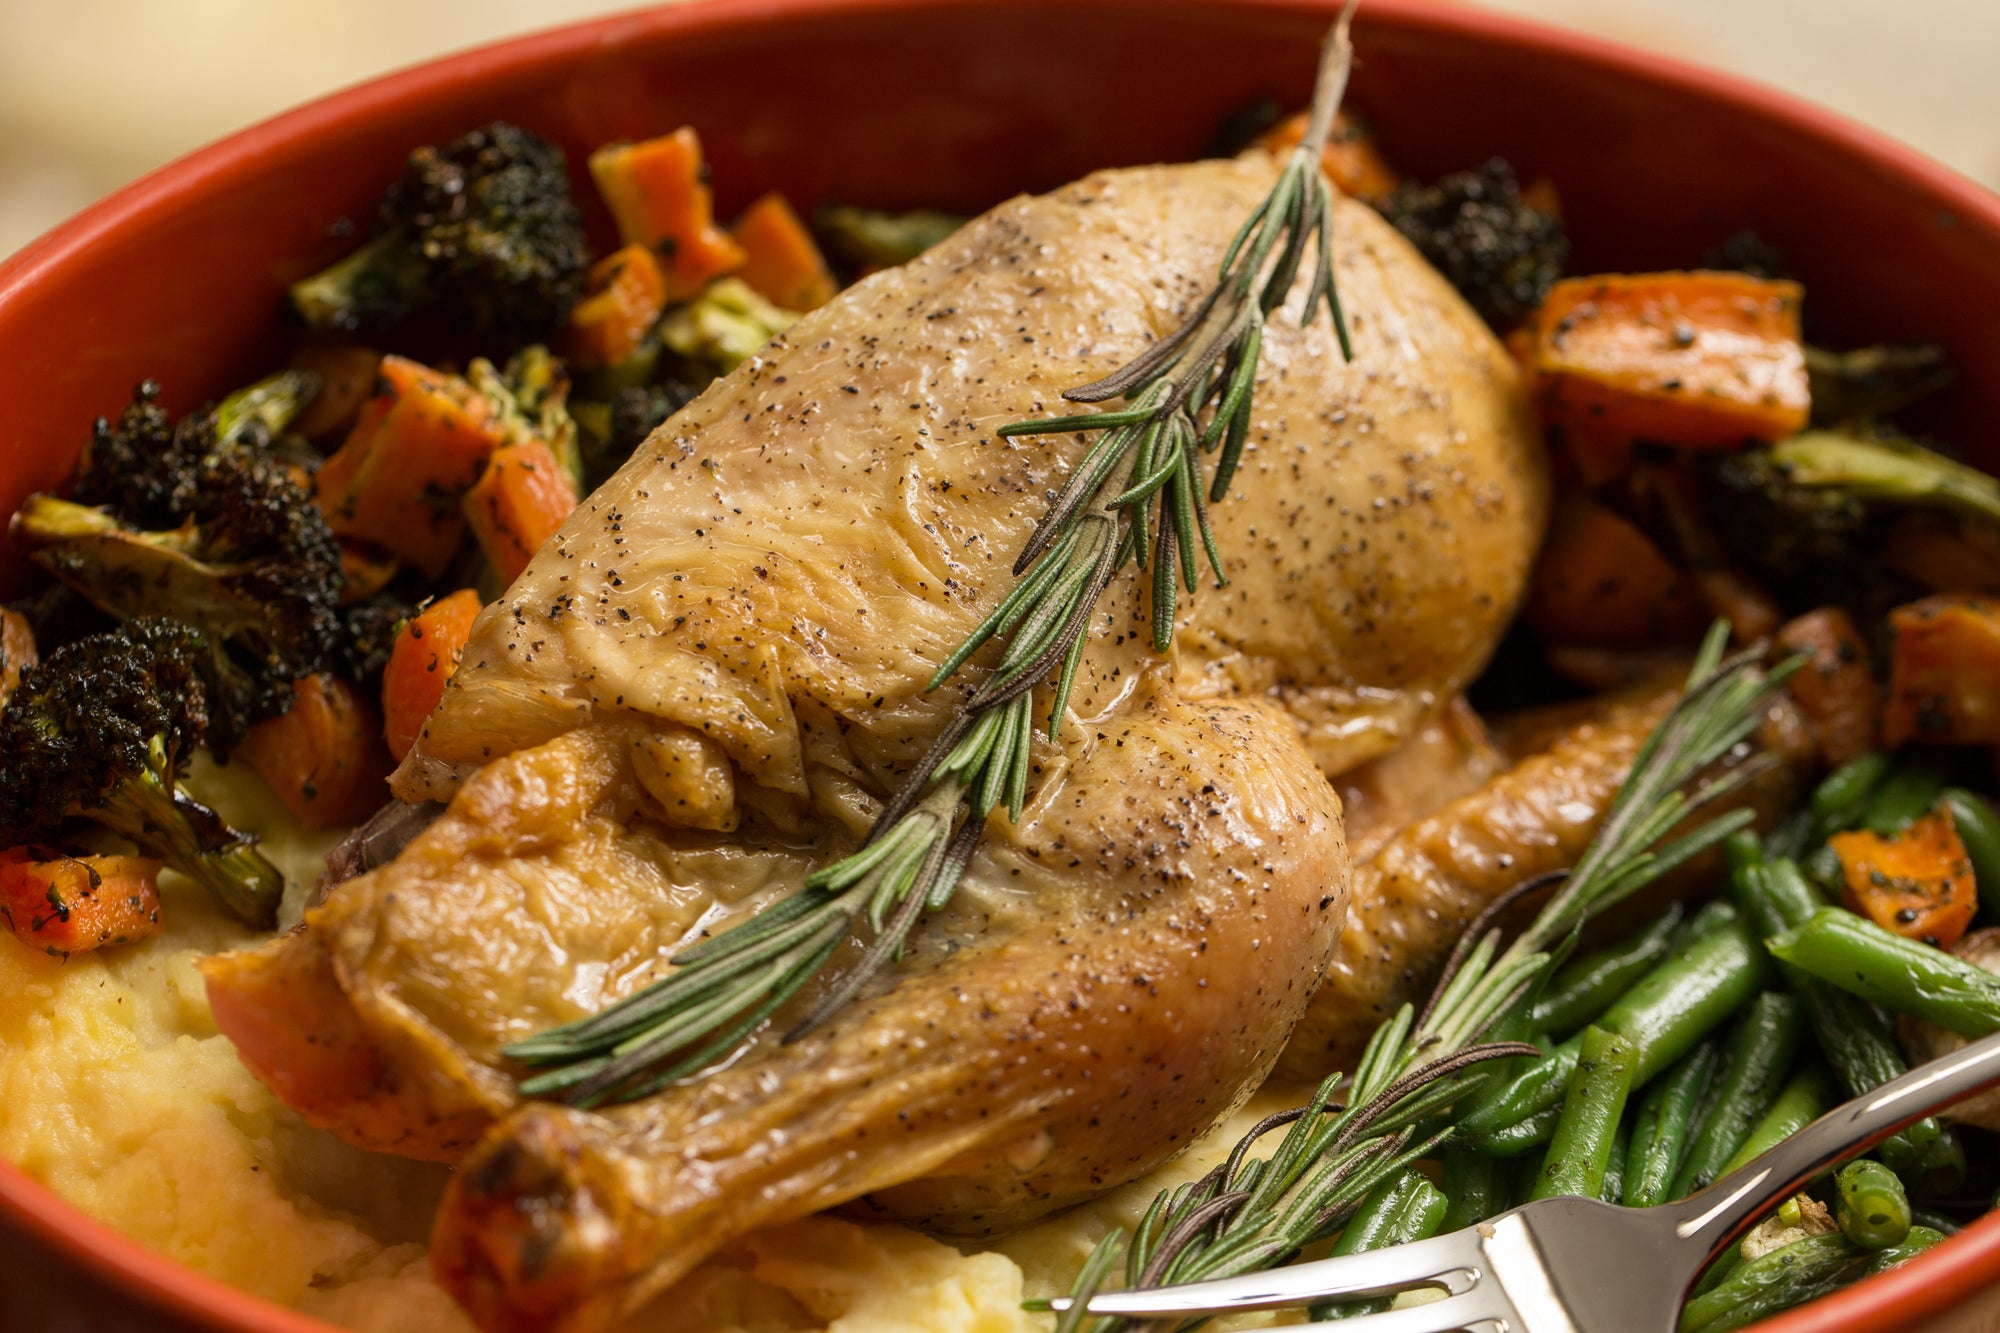 Rotisserie chicken in a bowl with roasted carrots, broccoli, and string beans.